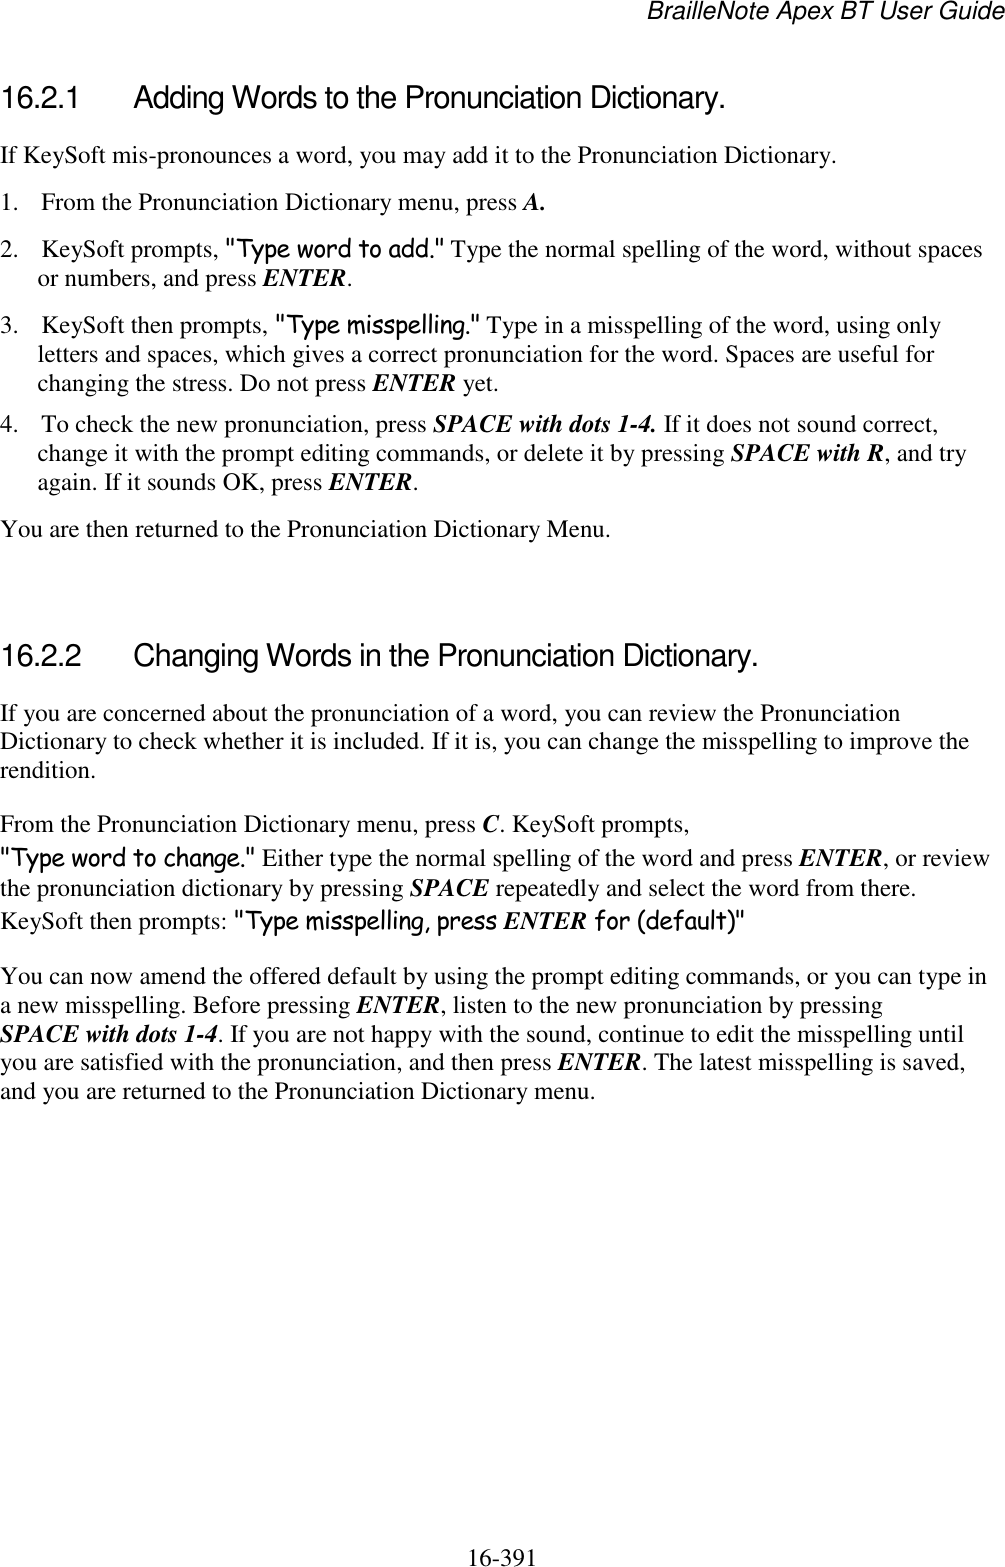 BrailleNote Apex BT User Guide   16-391   16.2.1  Adding Words to the Pronunciation Dictionary. If KeySoft mis-pronounces a word, you may add it to the Pronunciation Dictionary.  1. From the Pronunciation Dictionary menu, press A. 2. KeySoft prompts, &quot;Type word to add.&quot; Type the normal spelling of the word, without spaces or numbers, and press ENTER. 3. KeySoft then prompts, &quot;Type misspelling.&quot; Type in a misspelling of the word, using only letters and spaces, which gives a correct pronunciation for the word. Spaces are useful for changing the stress. Do not press ENTER yet.  4. To check the new pronunciation, press SPACE with dots 1-4. If it does not sound correct, change it with the prompt editing commands, or delete it by pressing SPACE with R, and try again. If it sounds OK, press ENTER.  You are then returned to the Pronunciation Dictionary Menu.   16.2.2  Changing Words in the Pronunciation Dictionary. If you are concerned about the pronunciation of a word, you can review the Pronunciation Dictionary to check whether it is included. If it is, you can change the misspelling to improve the rendition. From the Pronunciation Dictionary menu, press C. KeySoft prompts, &quot;Type word to change.&quot; Either type the normal spelling of the word and press ENTER, or review the pronunciation dictionary by pressing SPACE repeatedly and select the word from there. KeySoft then prompts: &quot;Type misspelling, press ENTER for (default)&quot; You can now amend the offered default by using the prompt editing commands, or you can type in a new misspelling. Before pressing ENTER, listen to the new pronunciation by pressing SPACE with dots 1-4. If you are not happy with the sound, continue to edit the misspelling until you are satisfied with the pronunciation, and then press ENTER. The latest misspelling is saved, and you are returned to the Pronunciation Dictionary menu.   